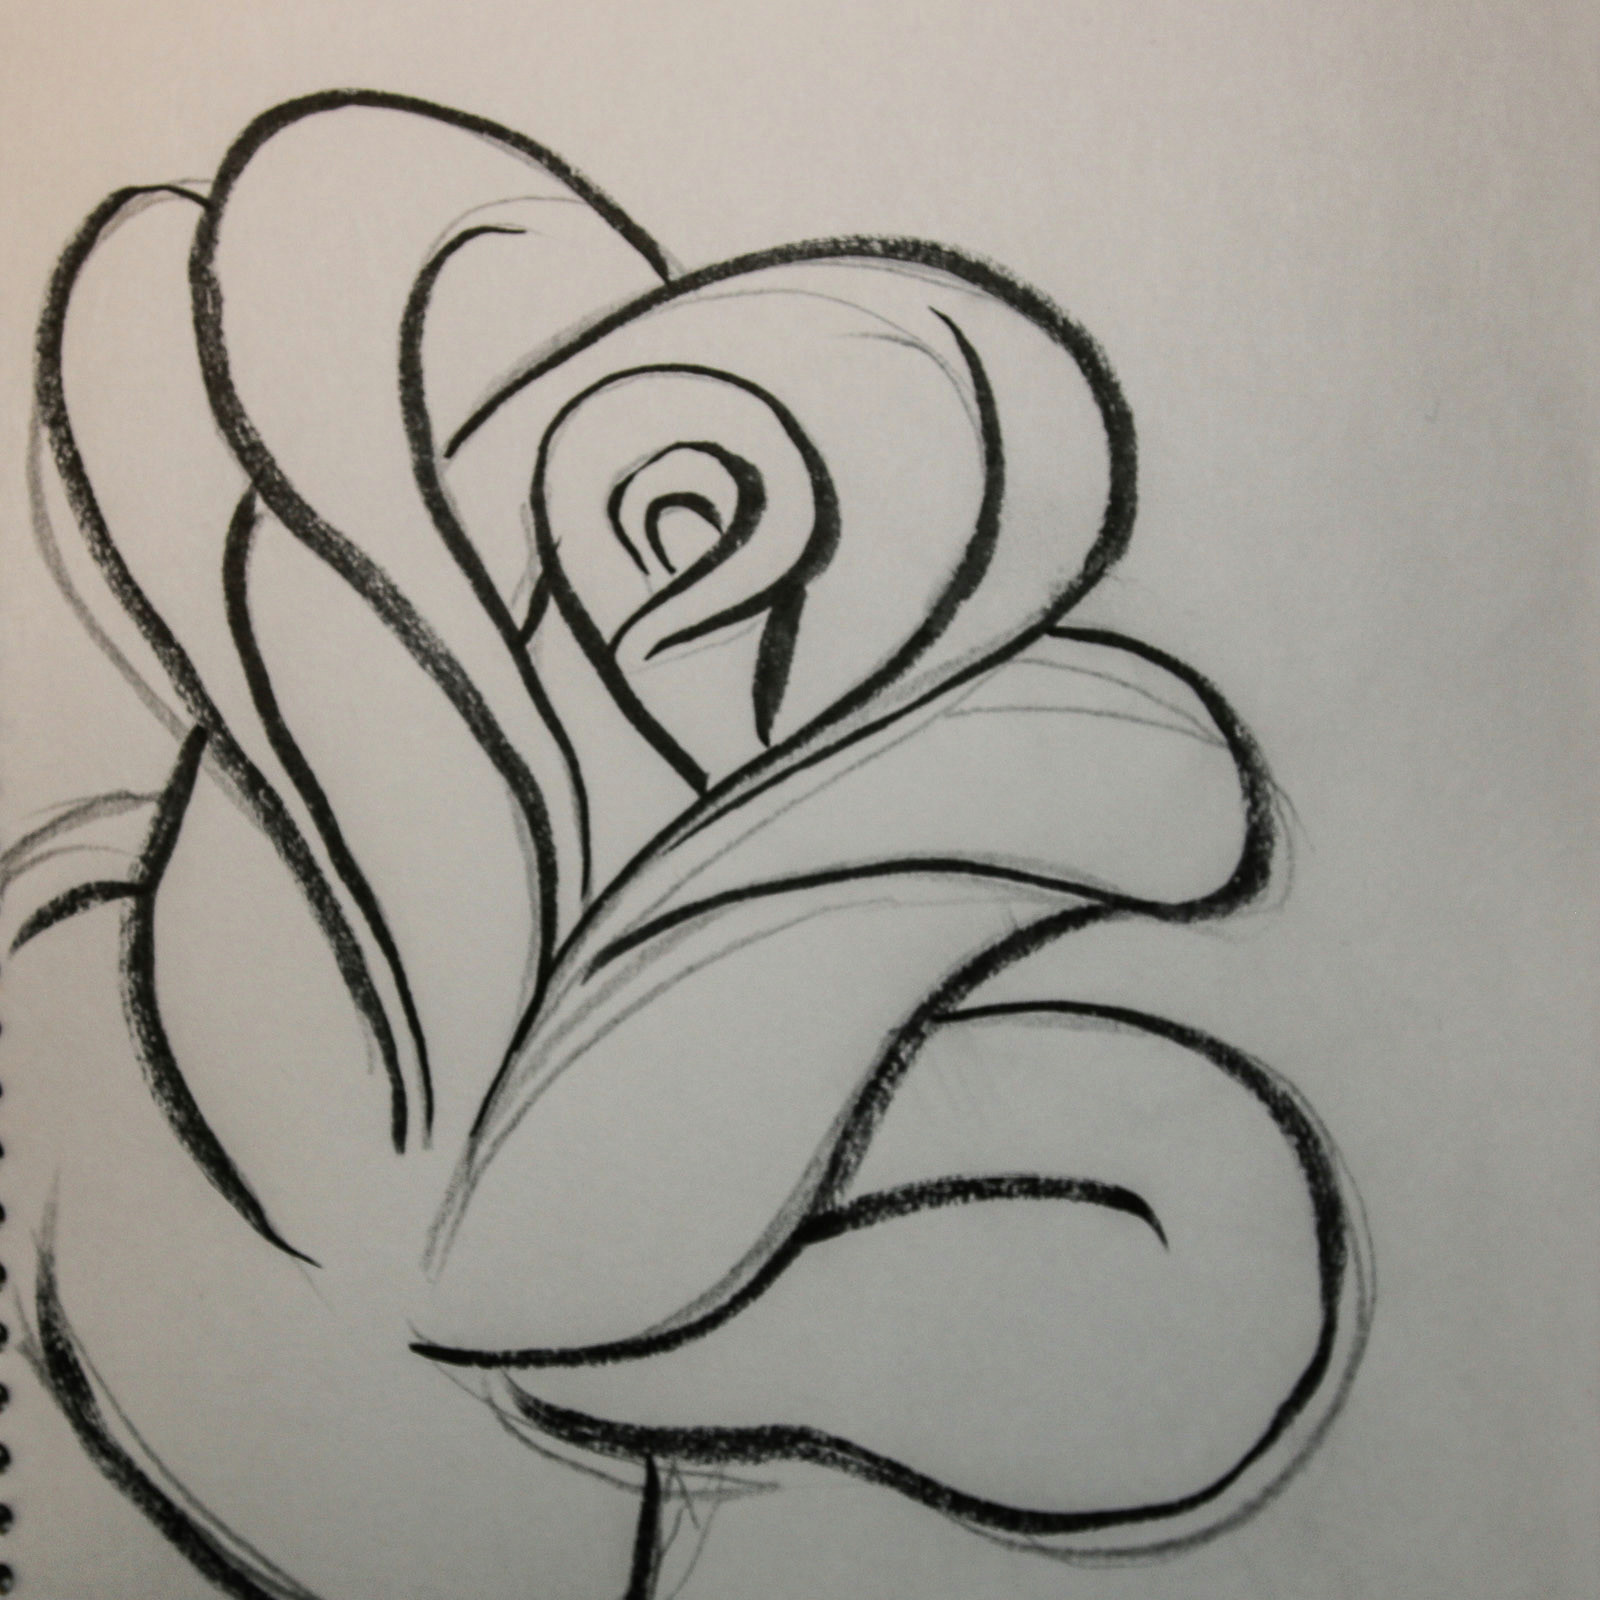 open rose drawing at getdrawings com free for personal use open